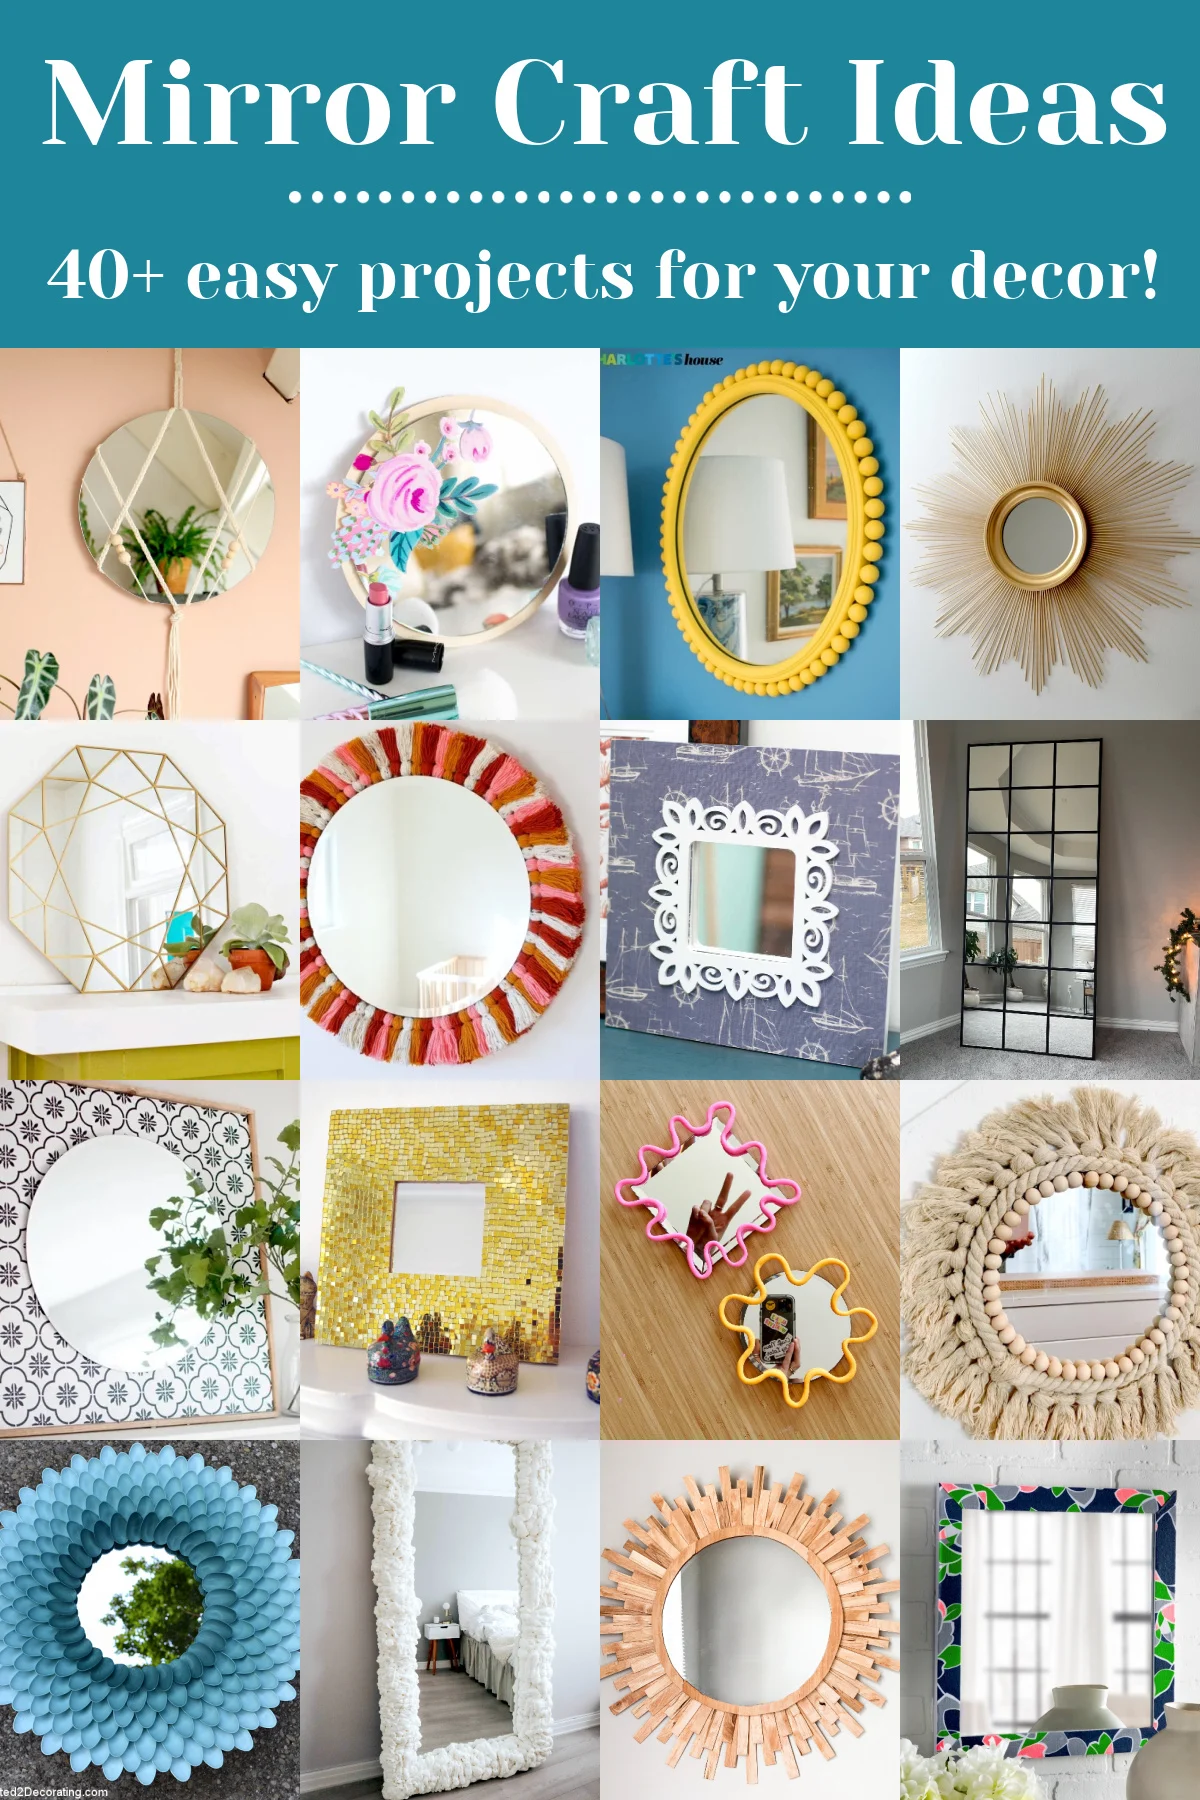 7 Things to make from small mirrors